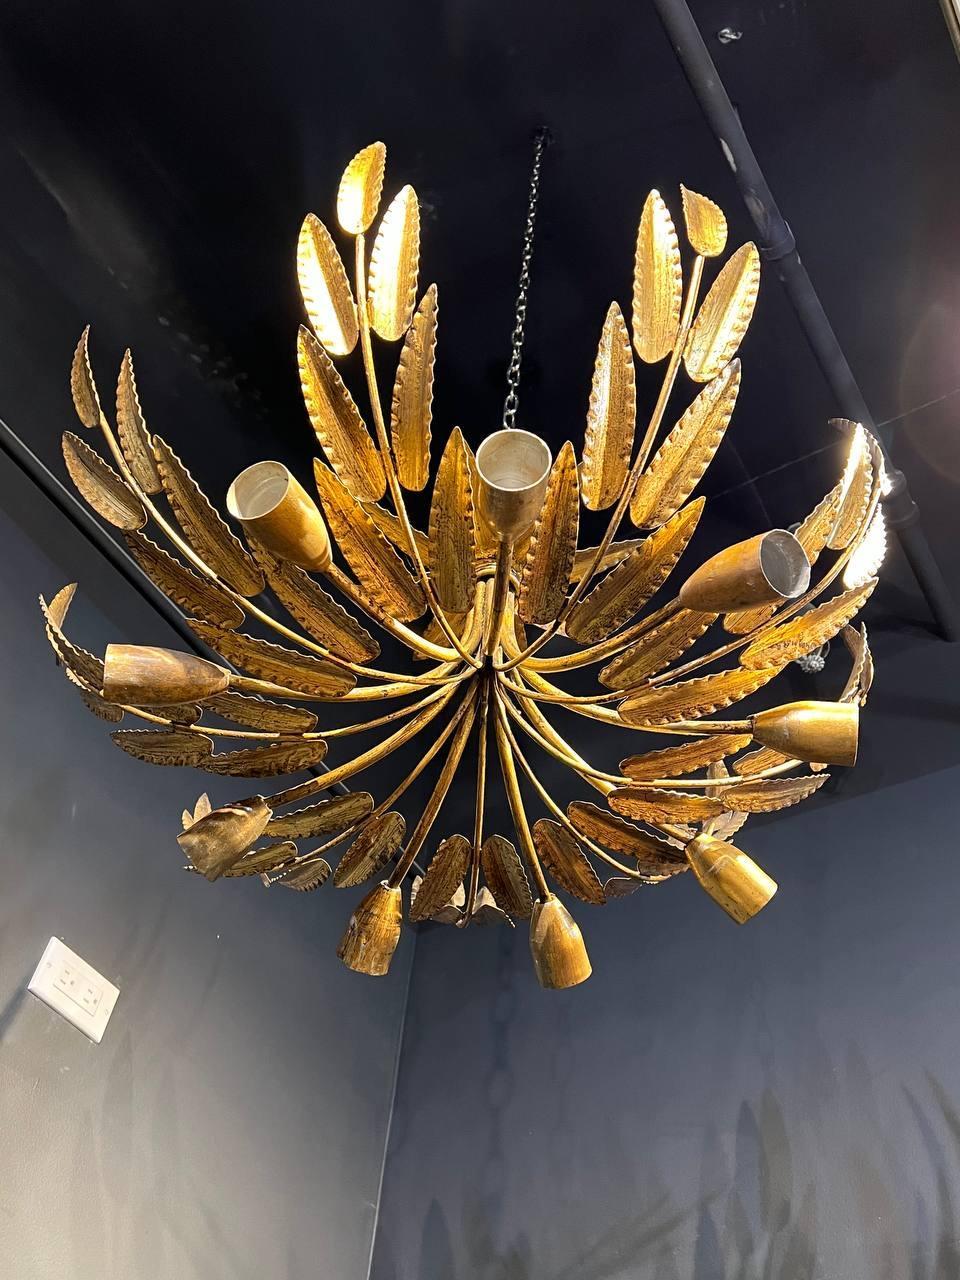 French Provincial 1930's French Gilt Metal Sunburst Light Fixture with 9 Lights  For Sale